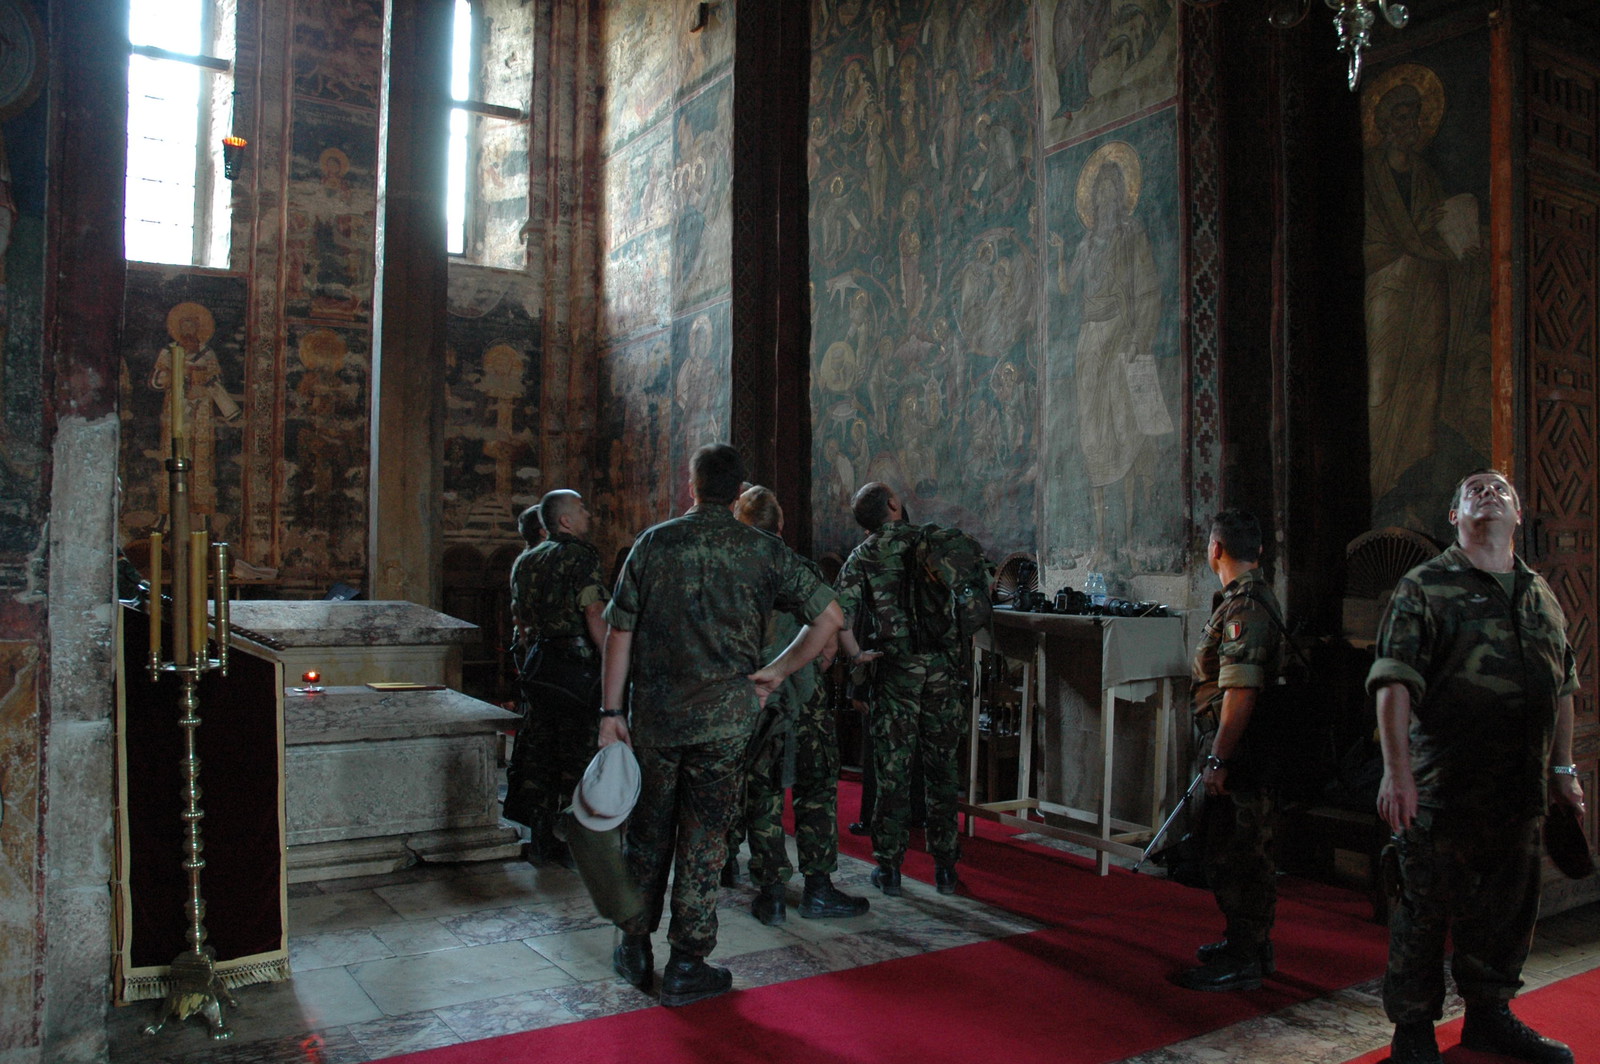 KFOR Soldiers visiting the Monastery 3